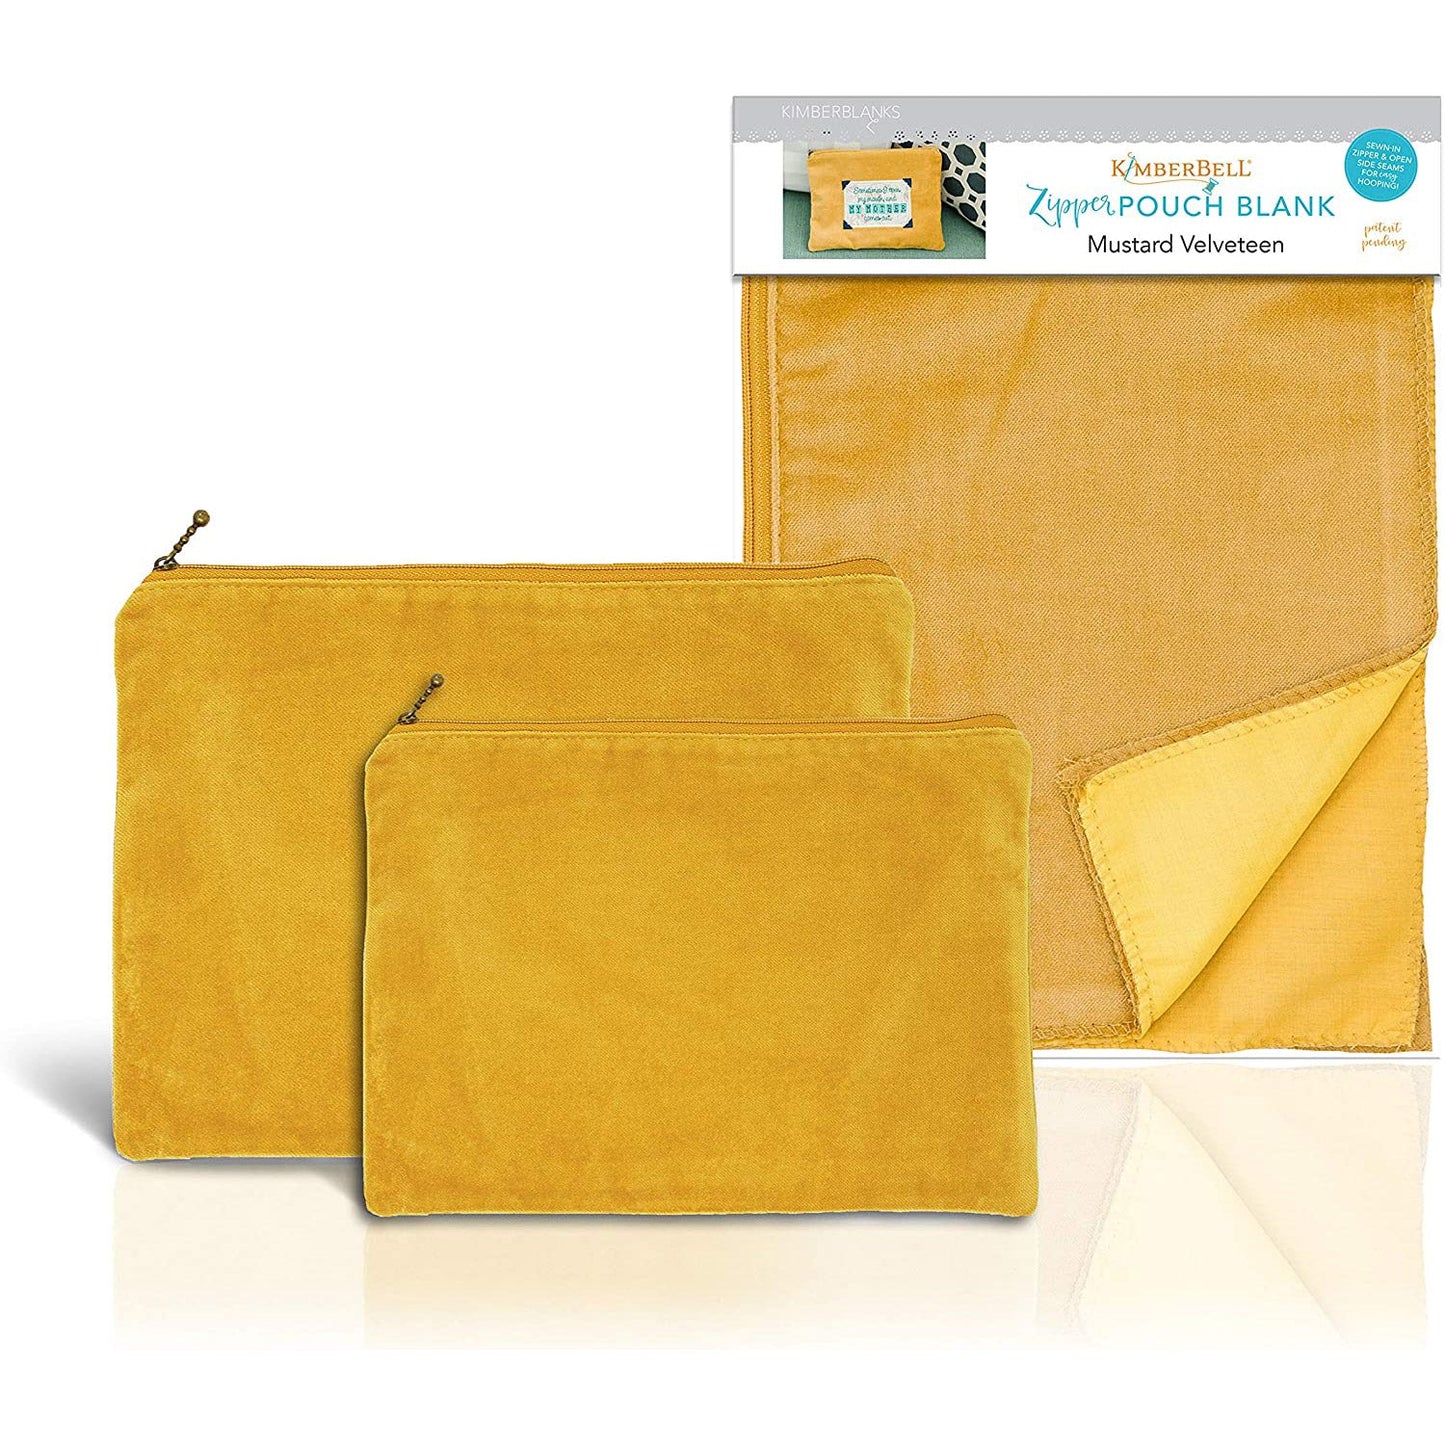 Zipper Pouch Blanks in Mustard Velveteen by Kimberbell is available in two sizes: Small (KDKB231) and Large (KDKB232). The patent pending design features an open side seam to make adding your favorite design or personalization easier than ever, and a simple straight stitch completes the bag after the design is added.  Each bag is fully lined and features a decorative zipper pull.